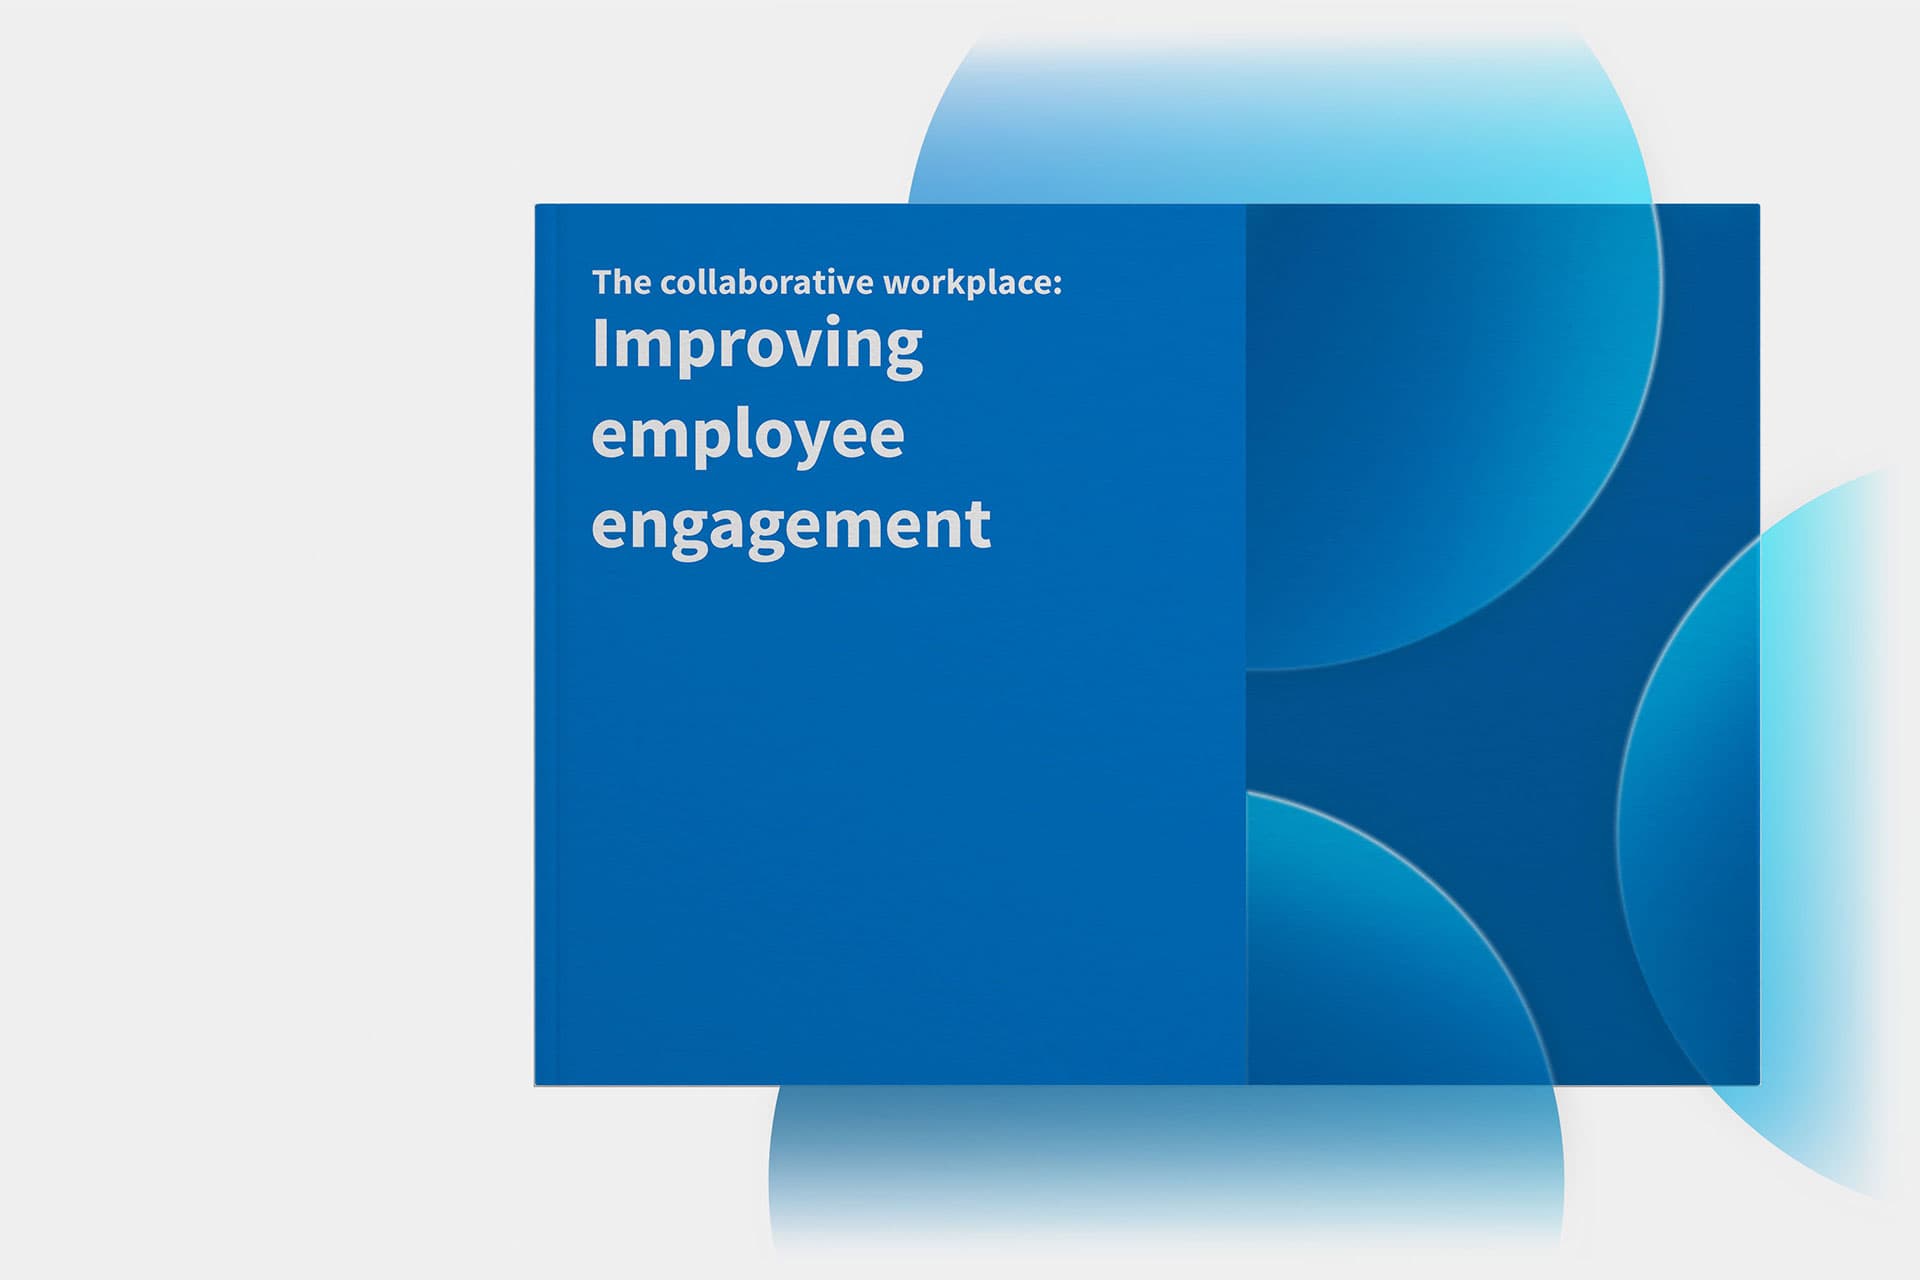 corp-employee-engagement-ebook-marquee-c0abb3afe9f9748a972c494a763975286a47d006629ac4b244630ba823584c4c